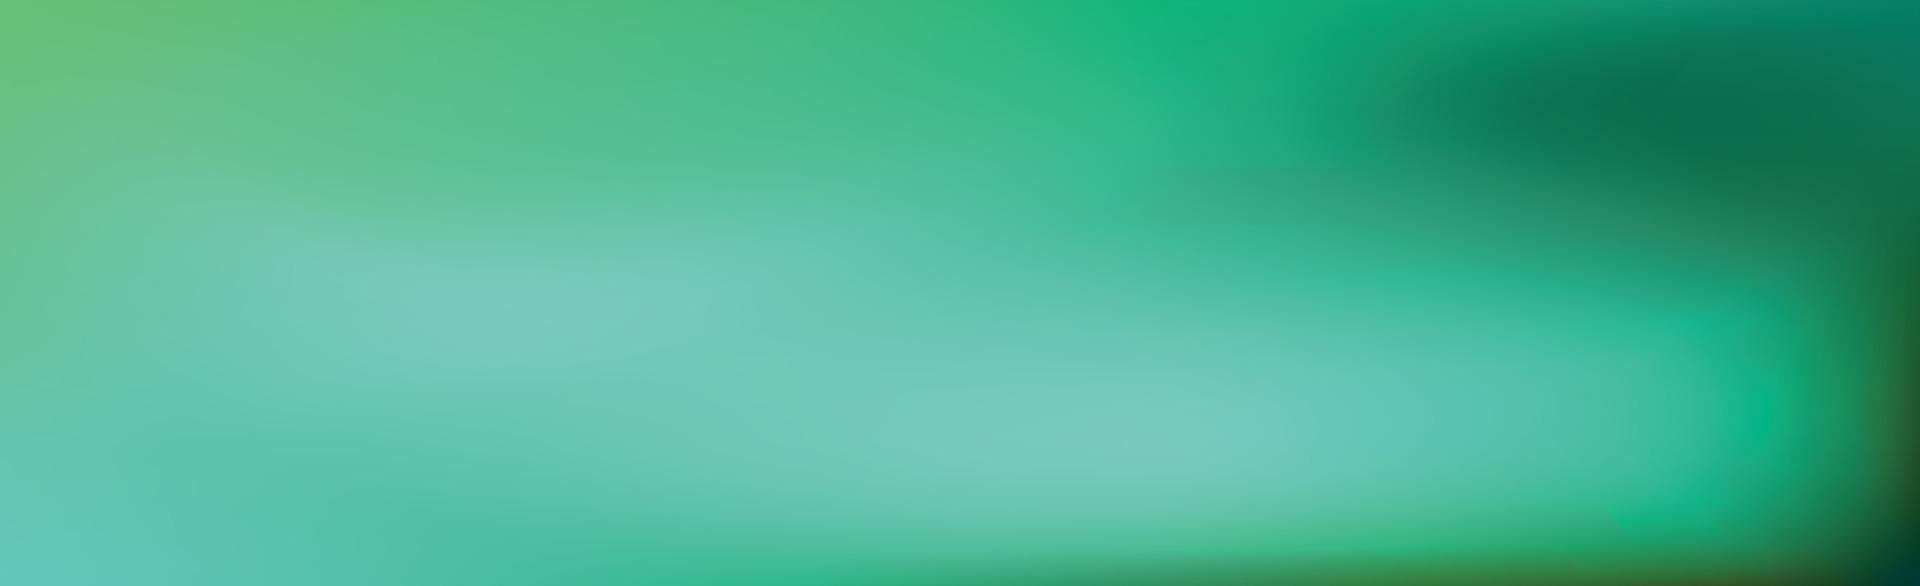 Abstract green gradient background in different shades - Vector